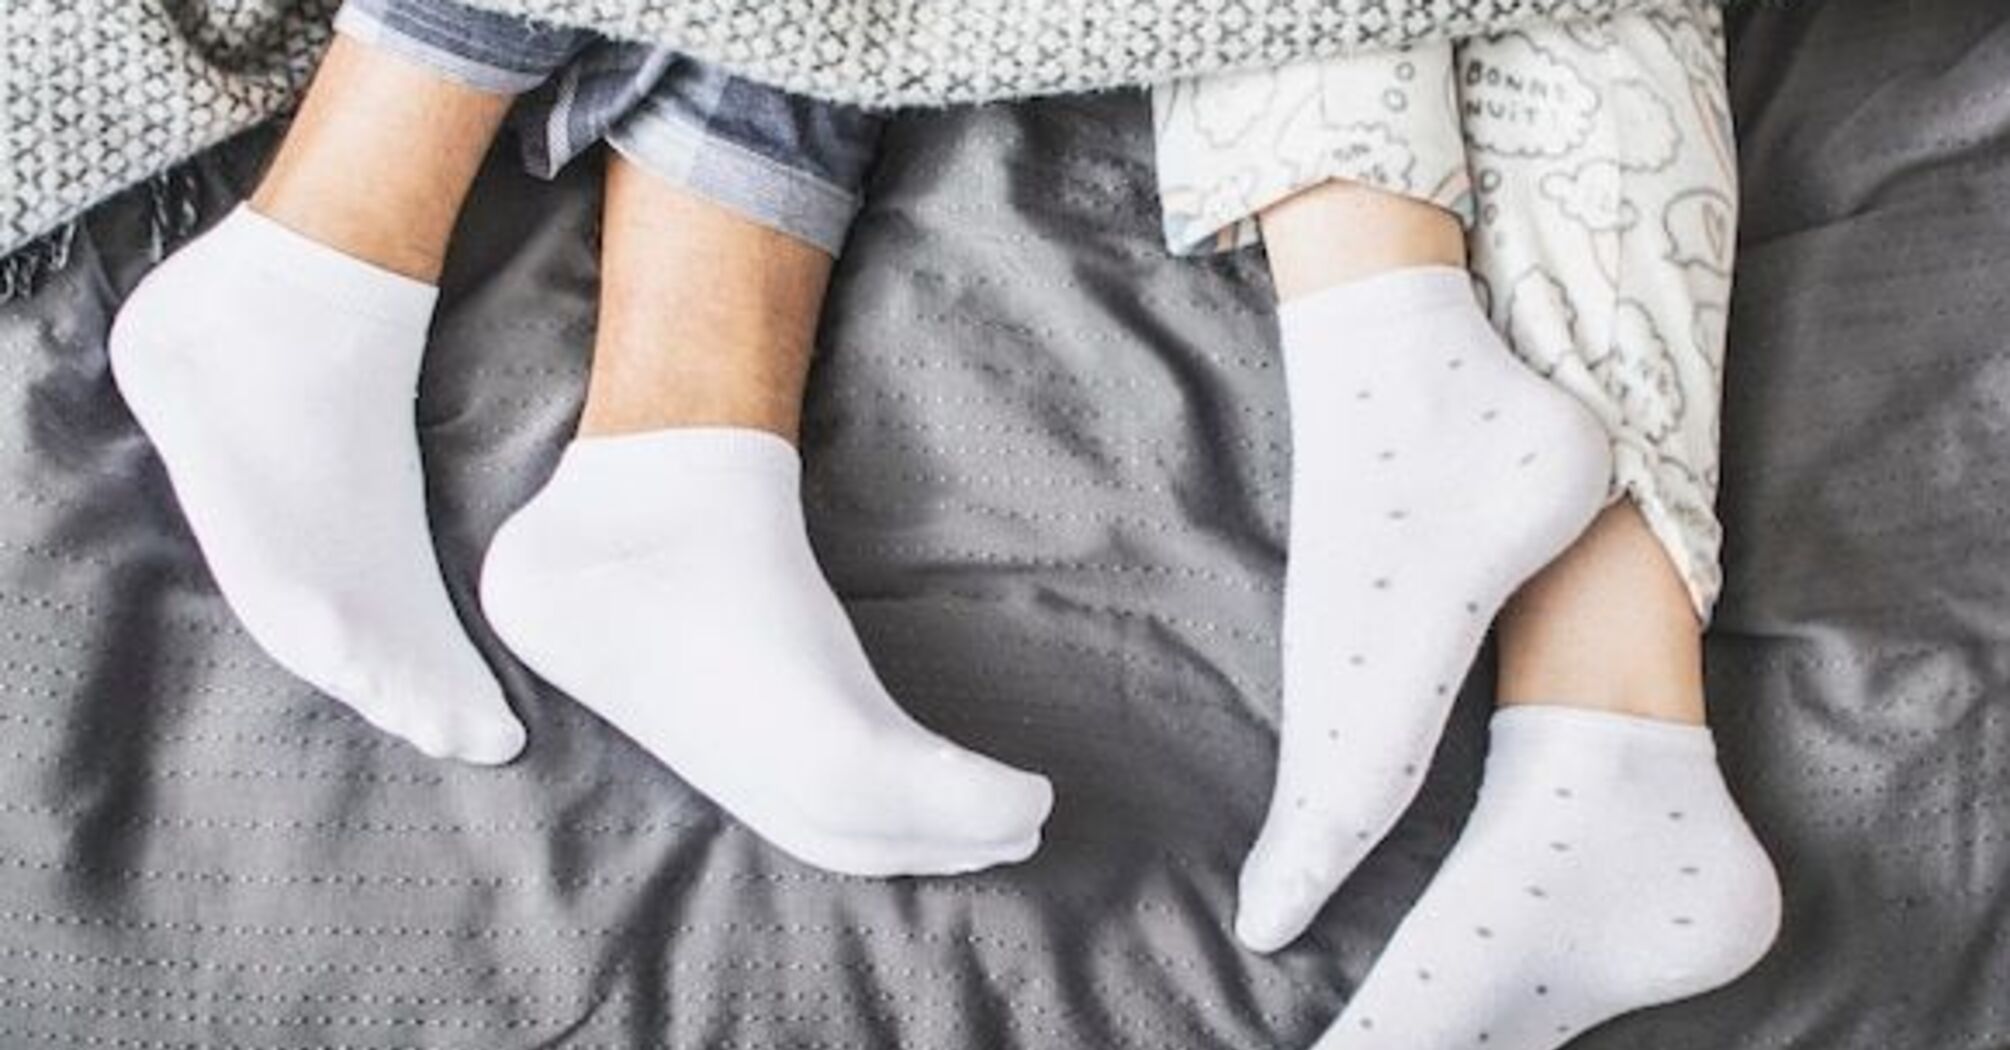 How to preserve the white color of socks during washing: 4 easy ways